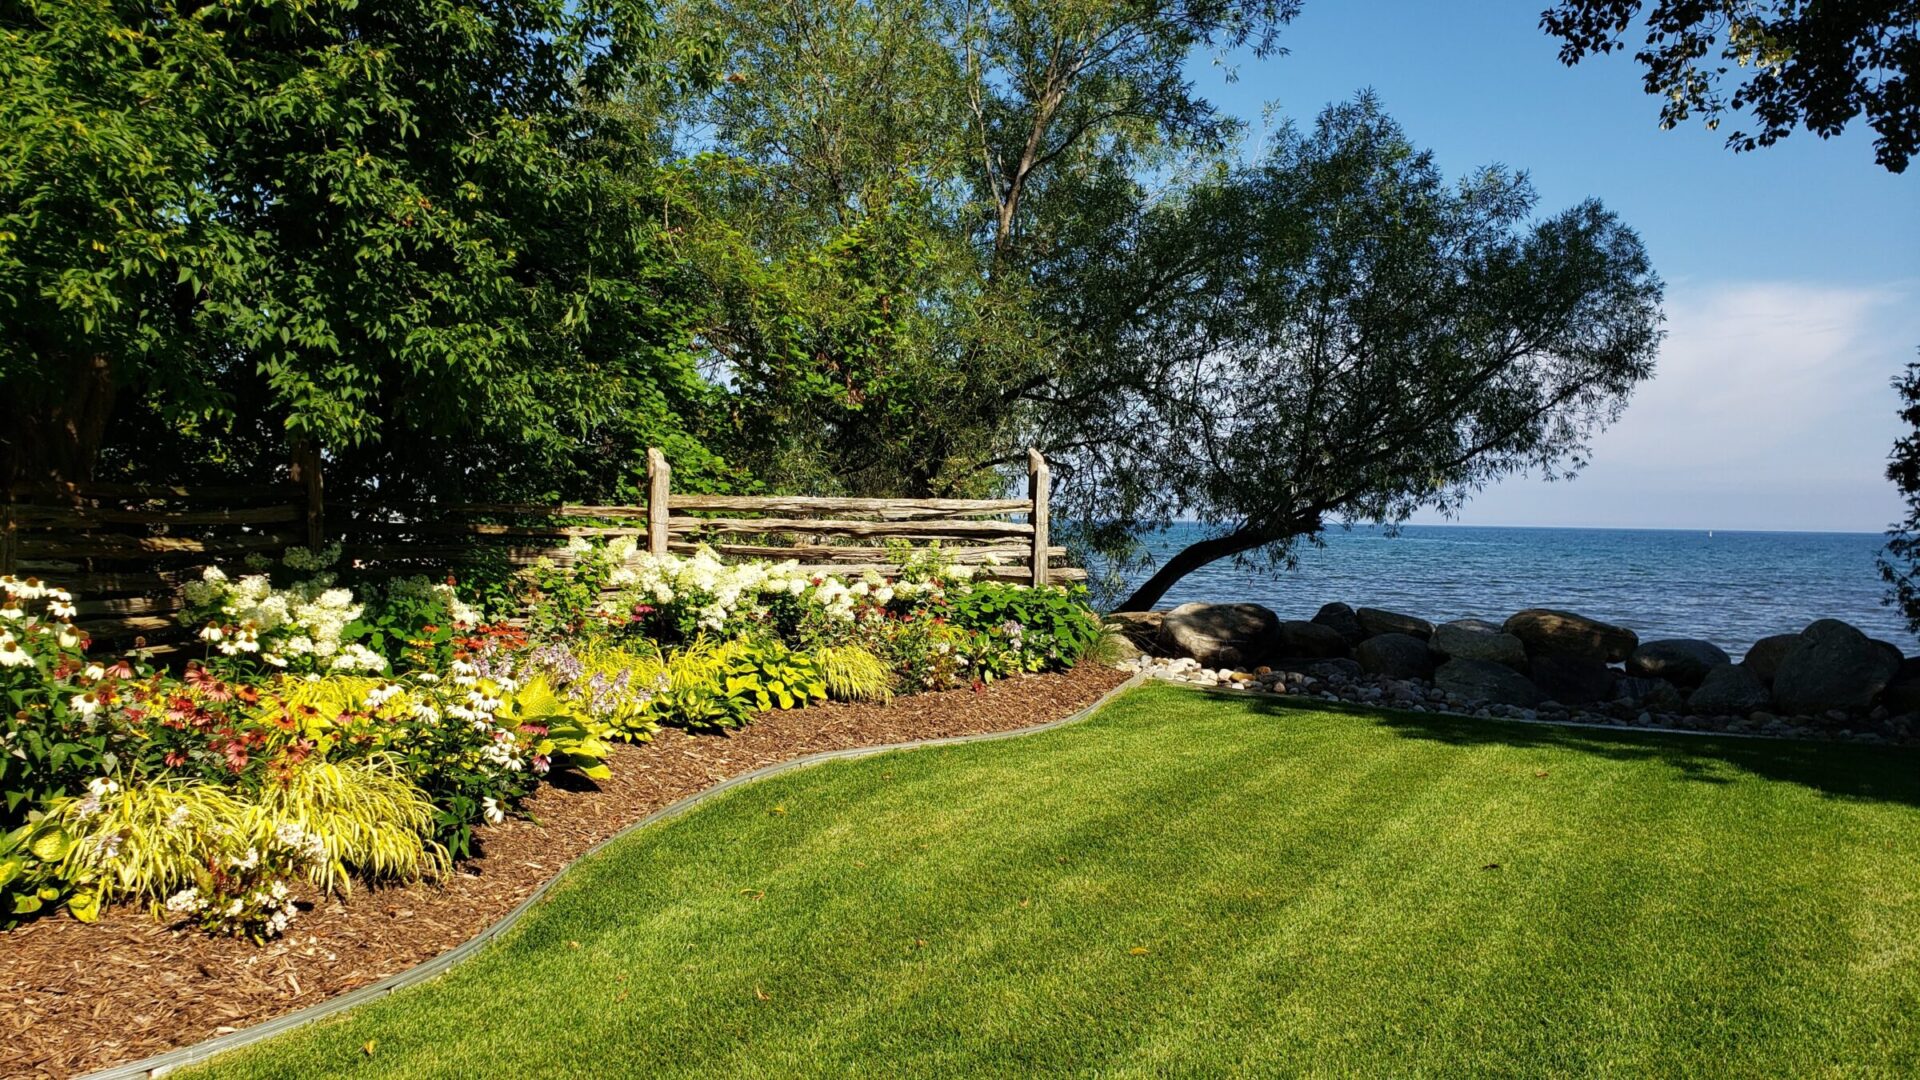 The image shows a serene lakefront garden with a wooden fence, lush green lawn, flowering plants, and a large body of water in the background.